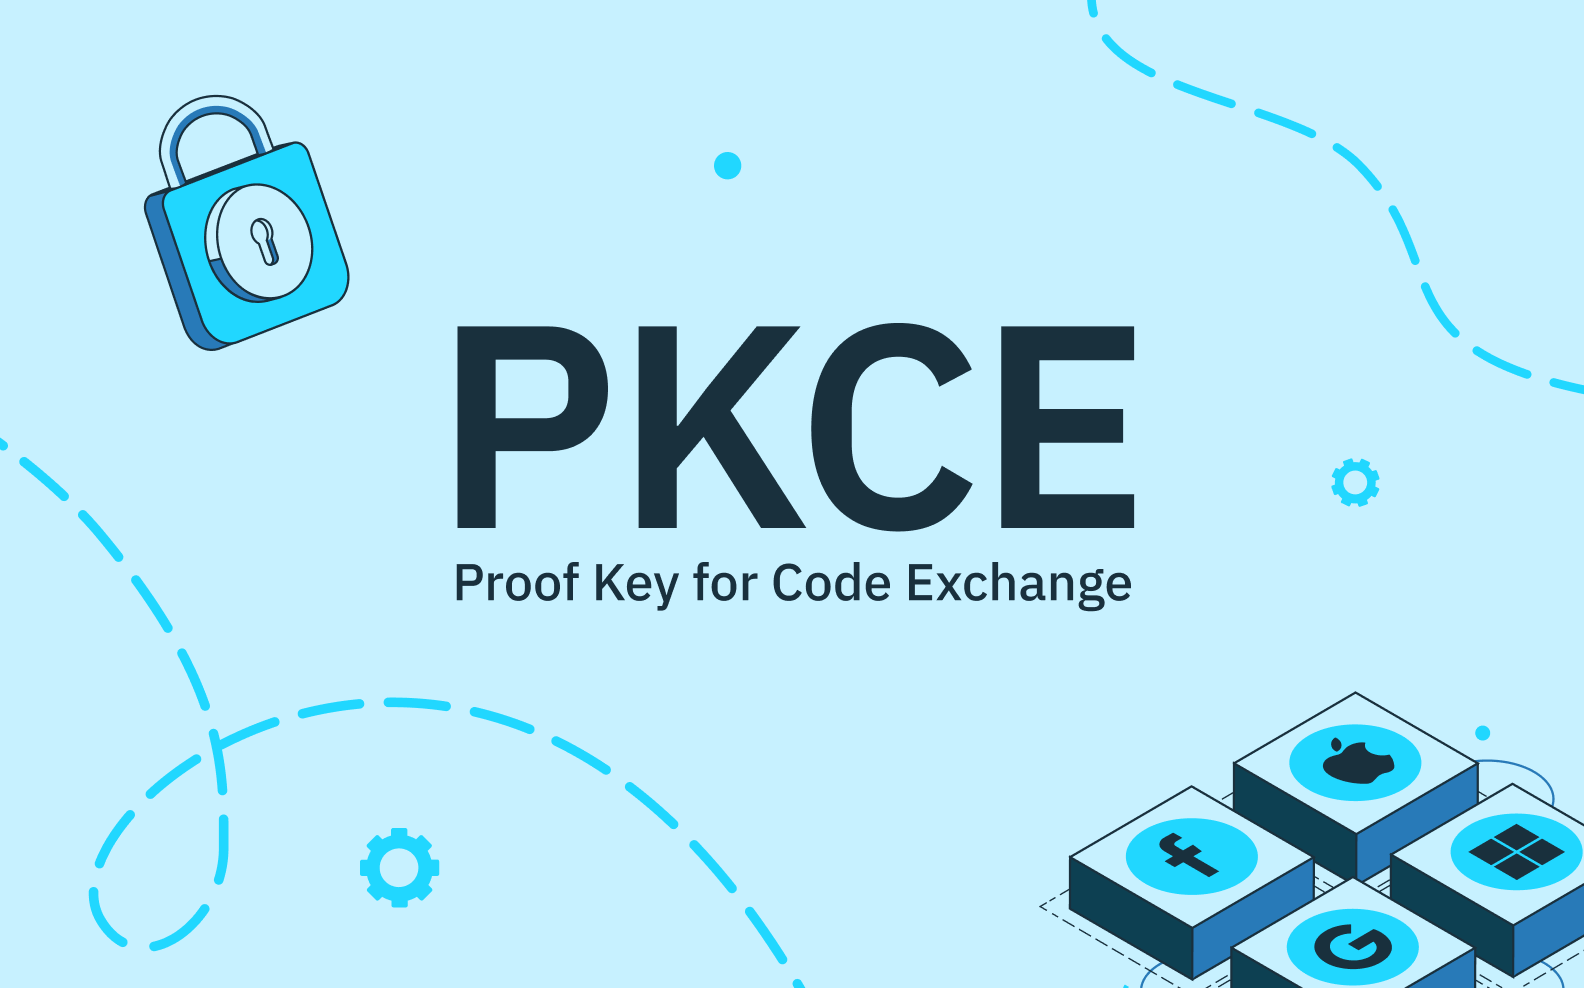 "PKCE: Proof Key for Code Exchange" on a light blue background